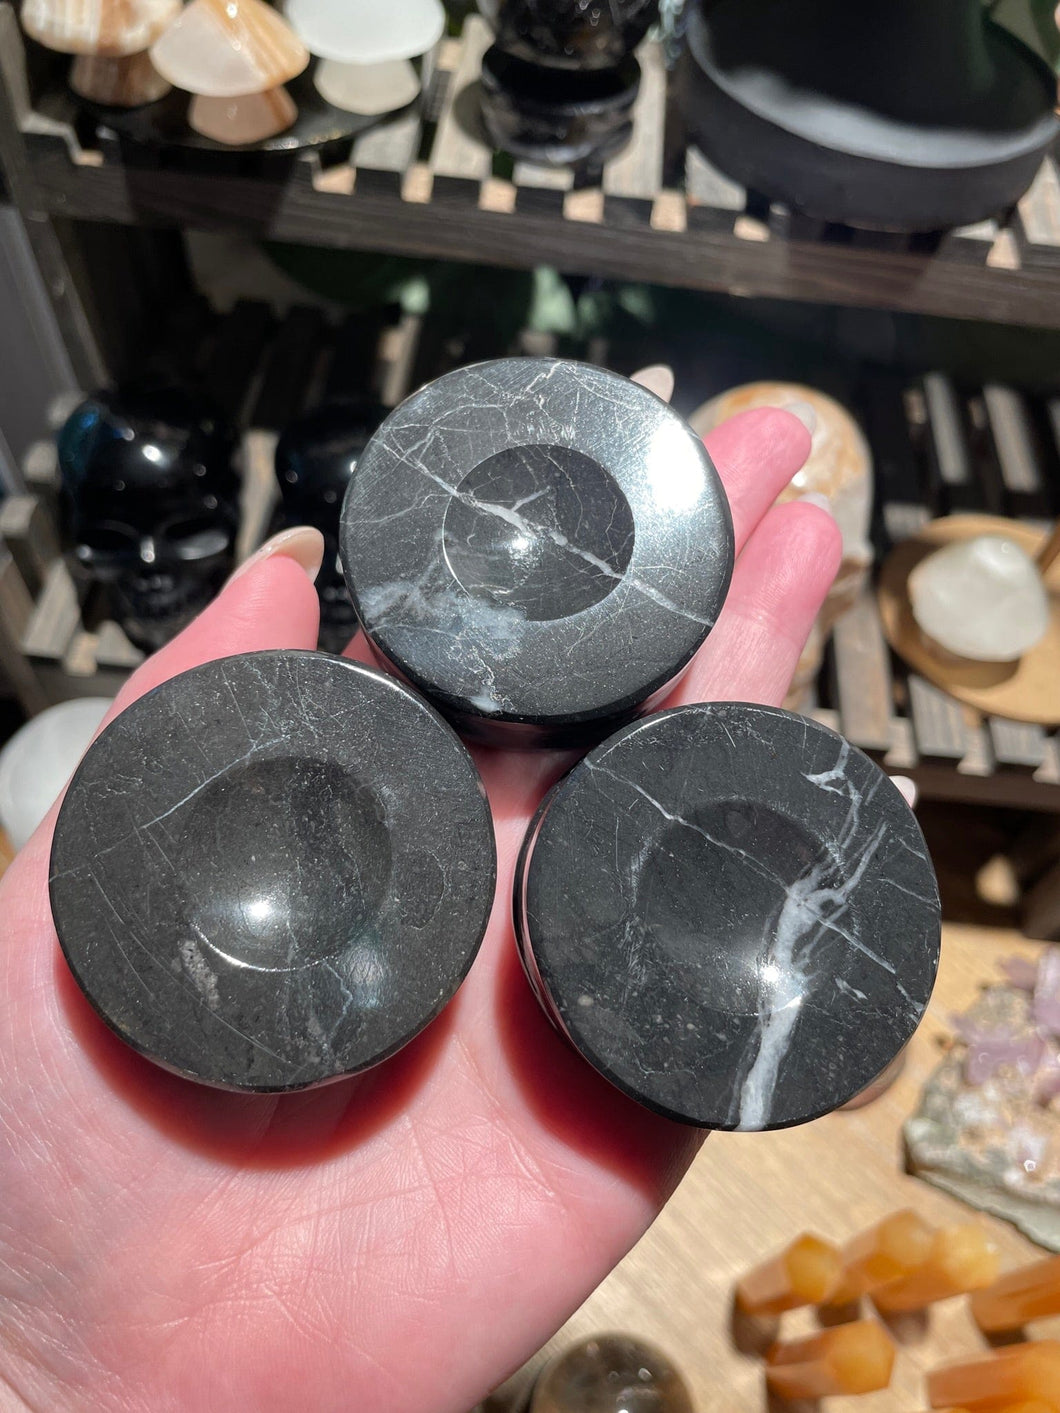 The Consecrated Crystal Crystals, Stones, Minerals Round Black Marble Sphere Holders